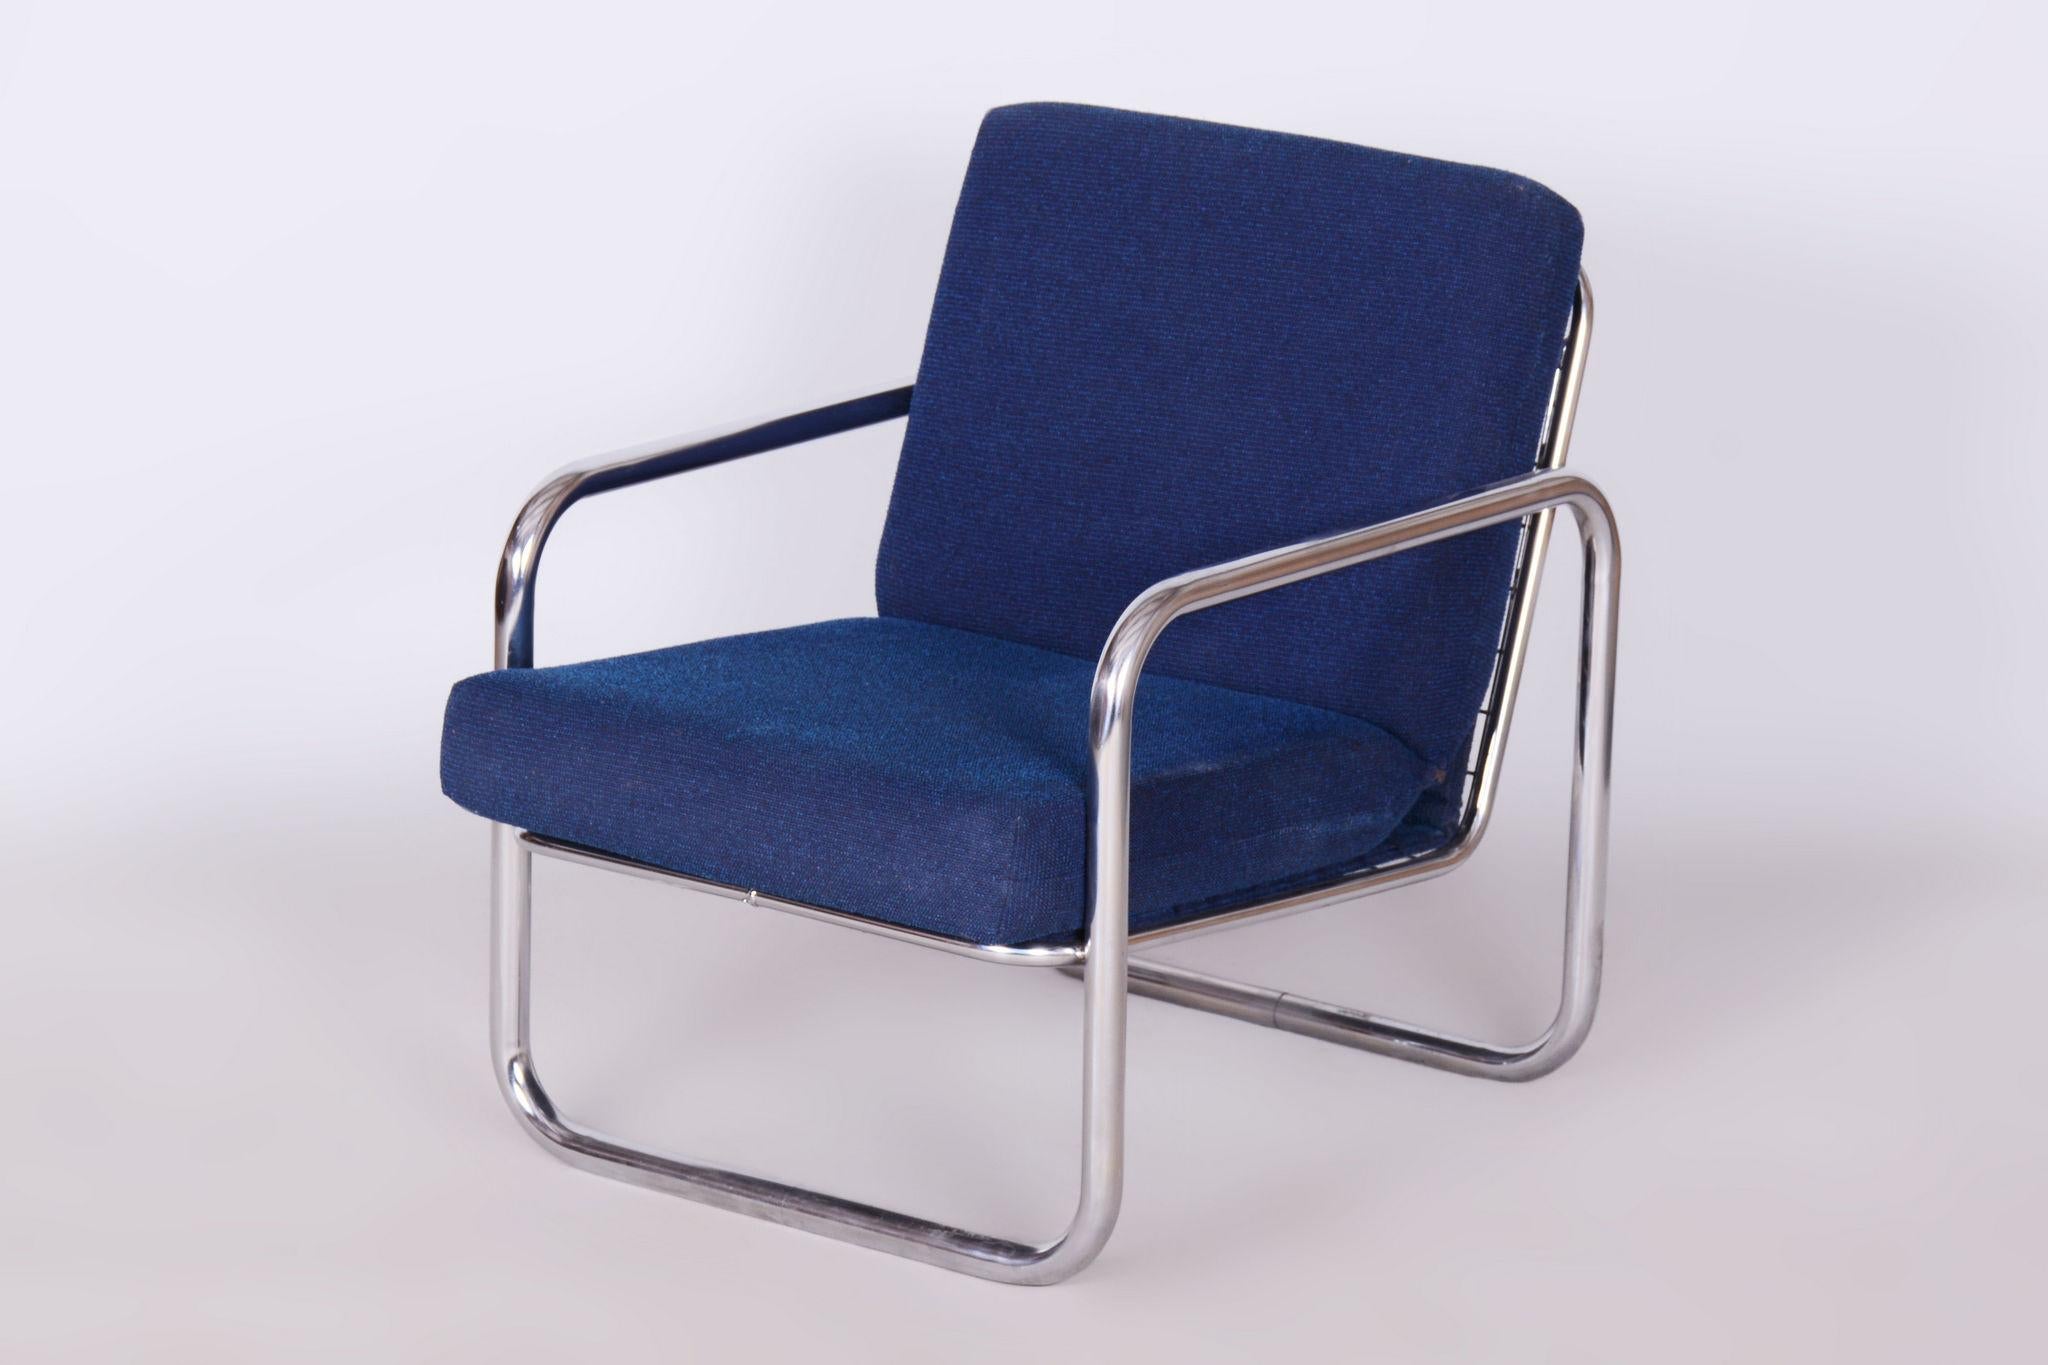 In pristine original condition, the upholstery has been professionally cleaned, and its polish revived by our refurbishing team in Czechia. 

The chrome parts have been cleaned and professionally restored. 

This item features classic Bauhaus design